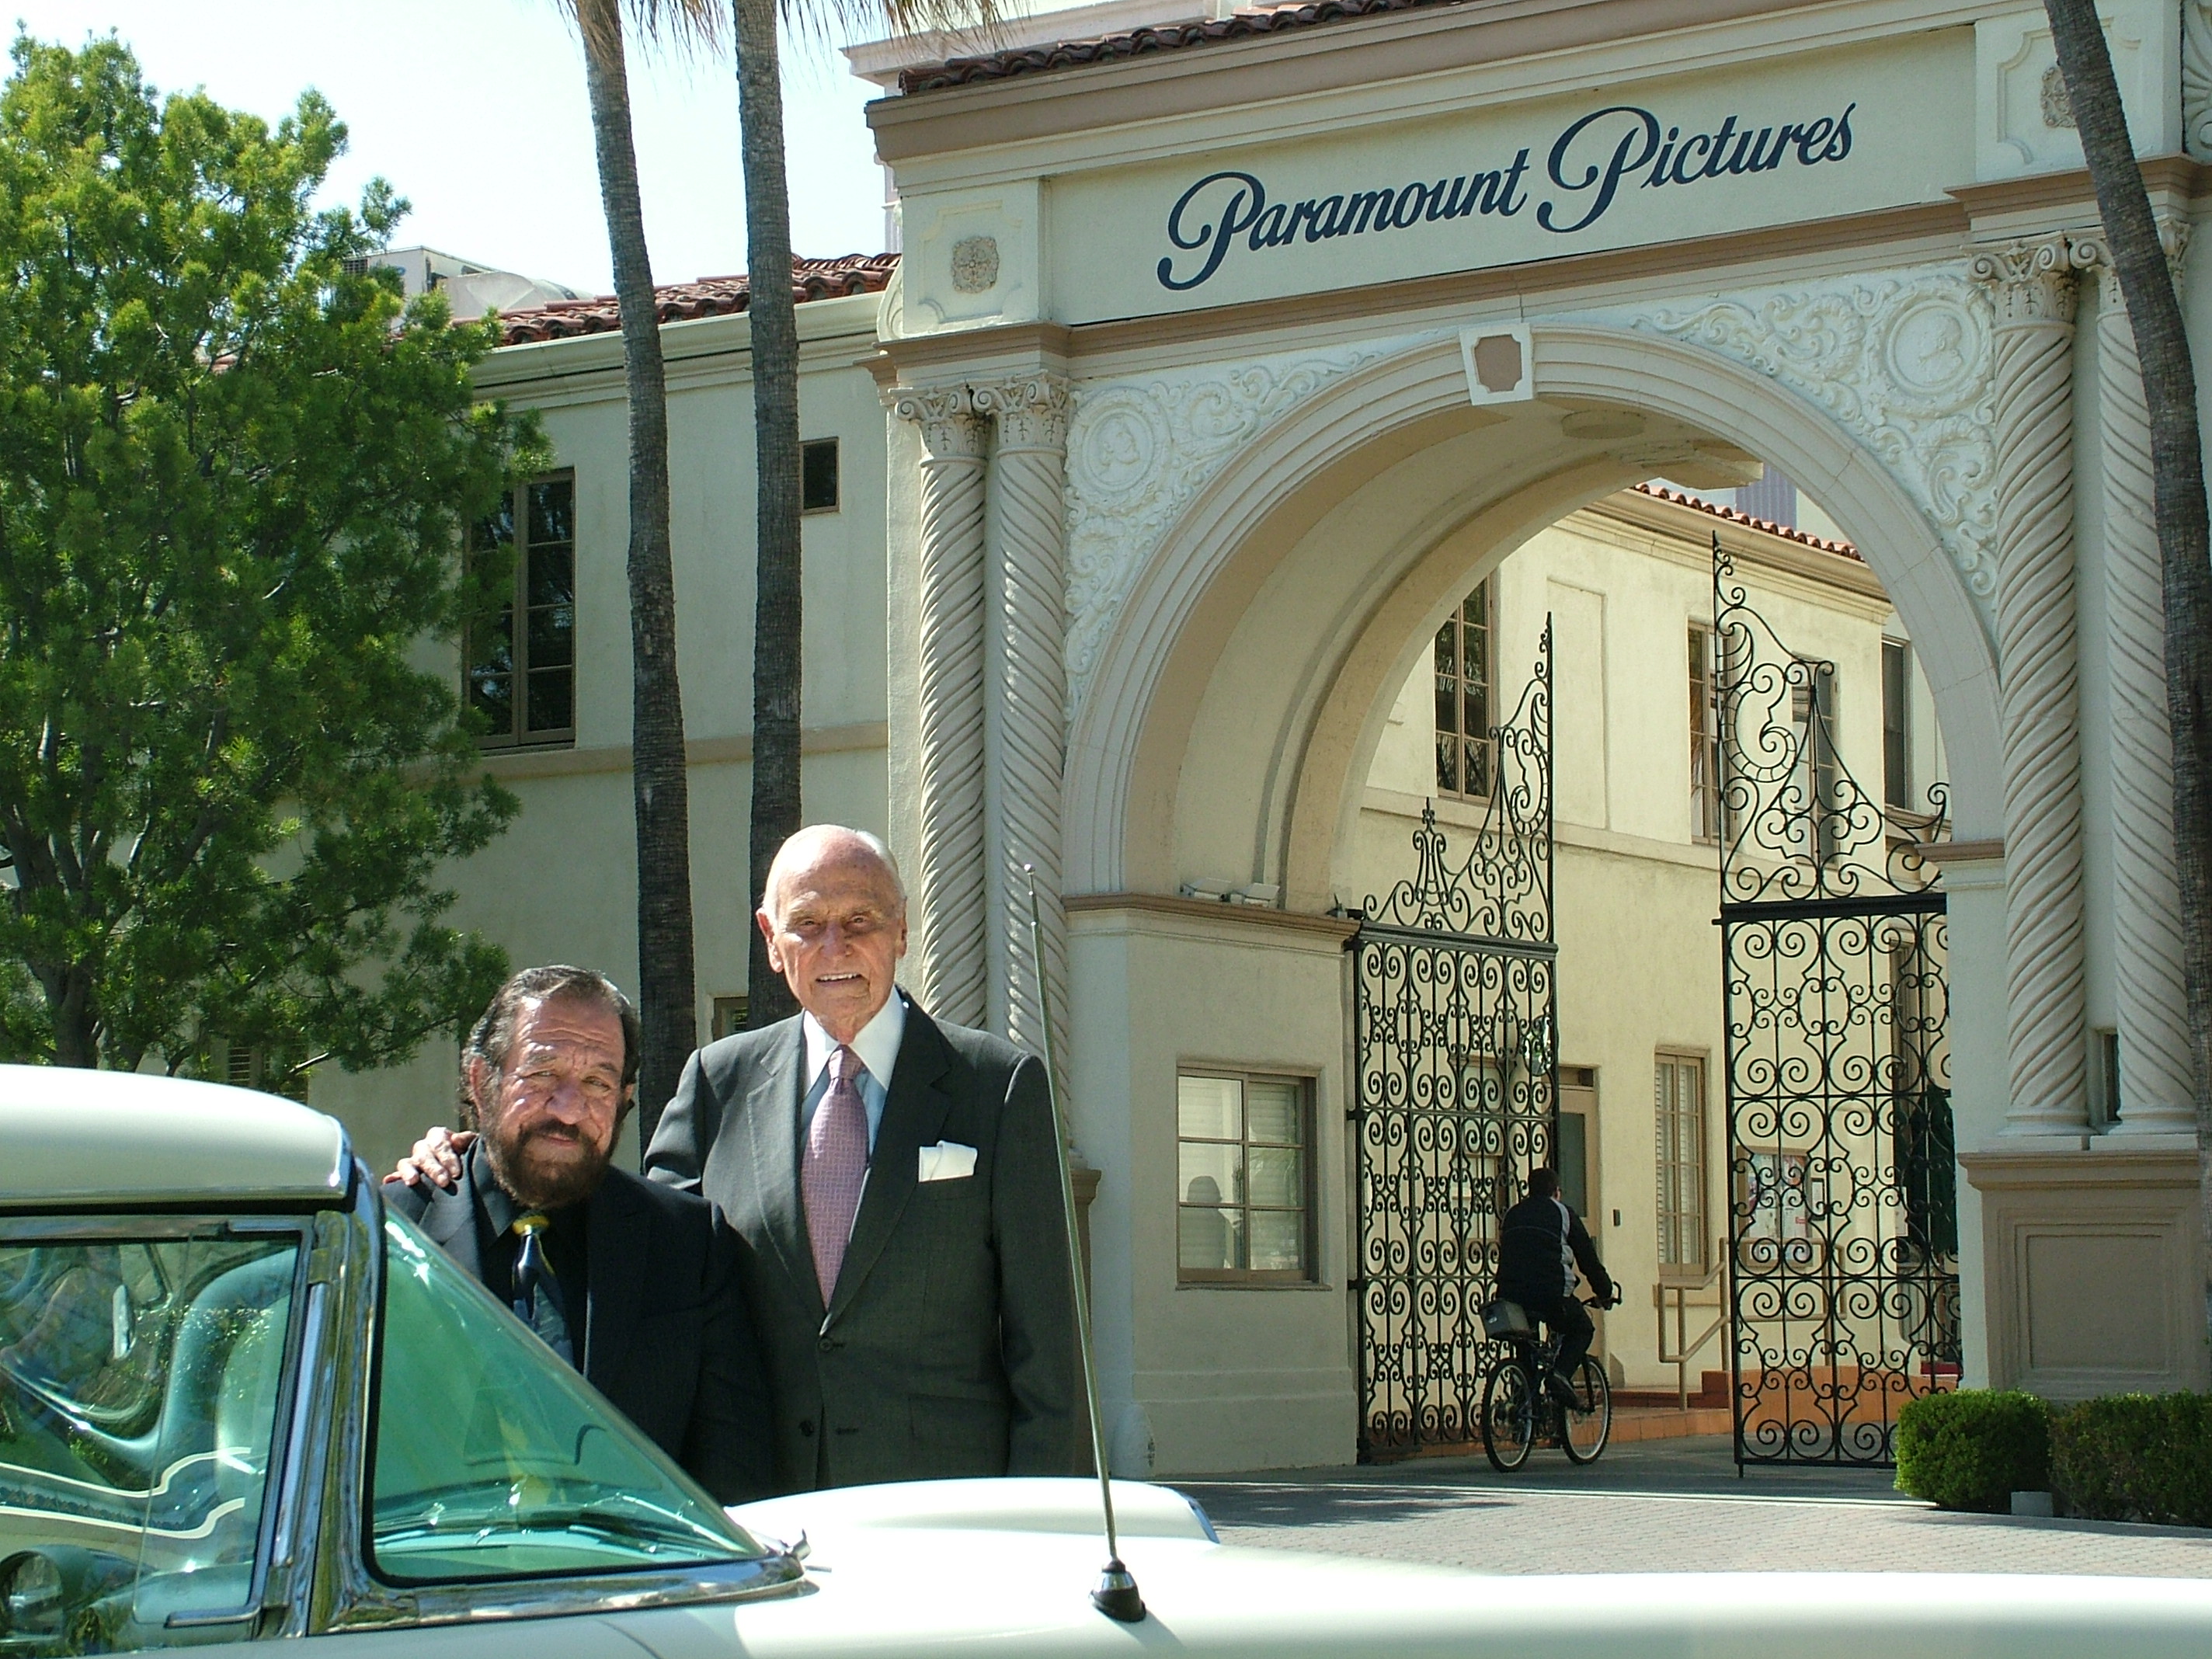 Jesse with A.C. Lyles, Producer, at Paramount Pictures for A.C.'s Anniversary party. 2008